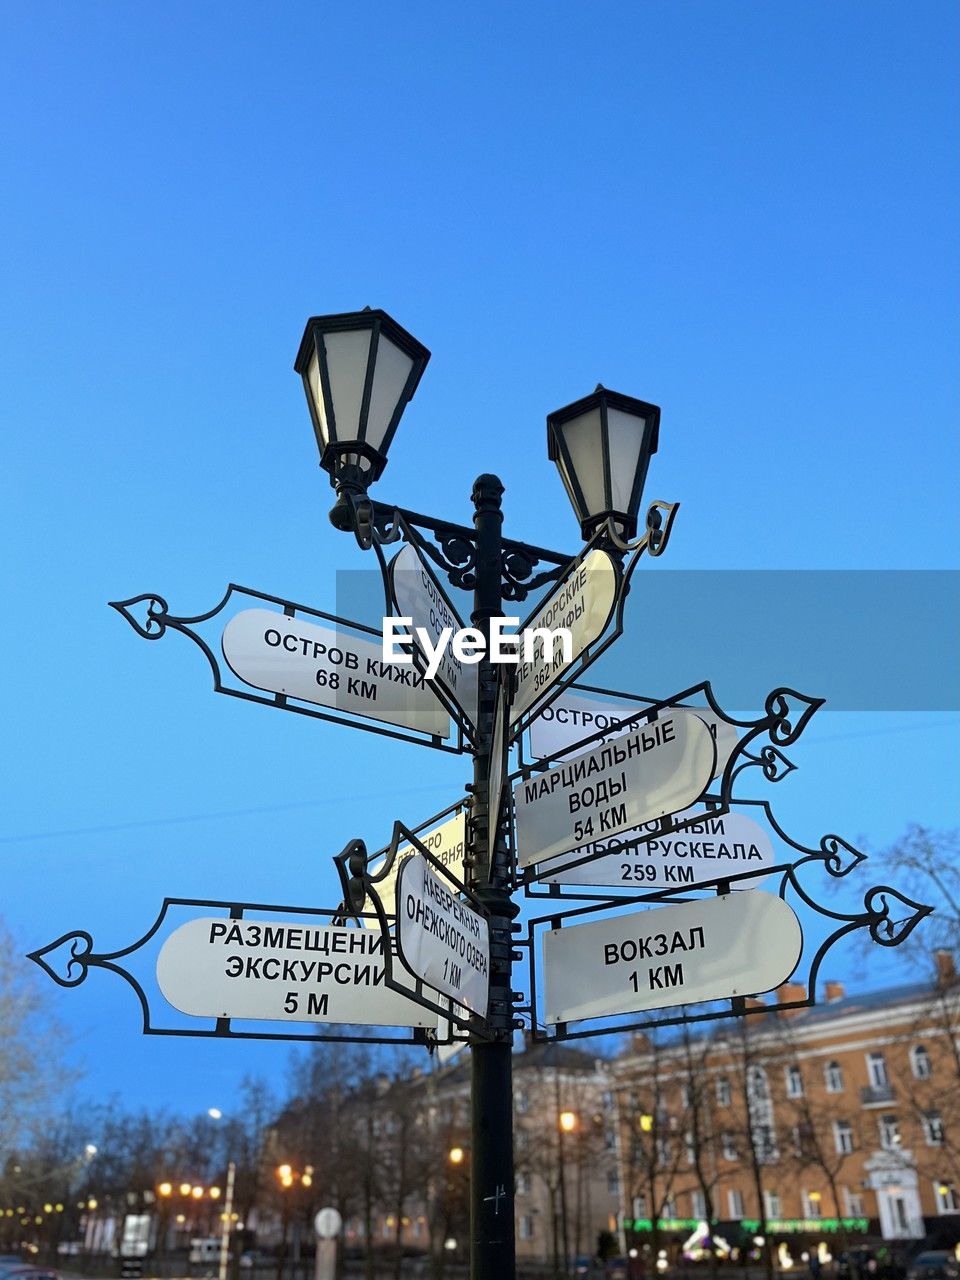 lighting, street light, sign, street, city, sky, communication, light fixture, architecture, illuminated, road, text, nature, guidance, clear sky, blue, lighting equipment, road sign, western script, arrow symbol, transportation, directional sign, light, outdoors, no people, building exterior, built structure, landmark, symbol, day, travel destinations, signage, travel, low angle view, city life, information sign